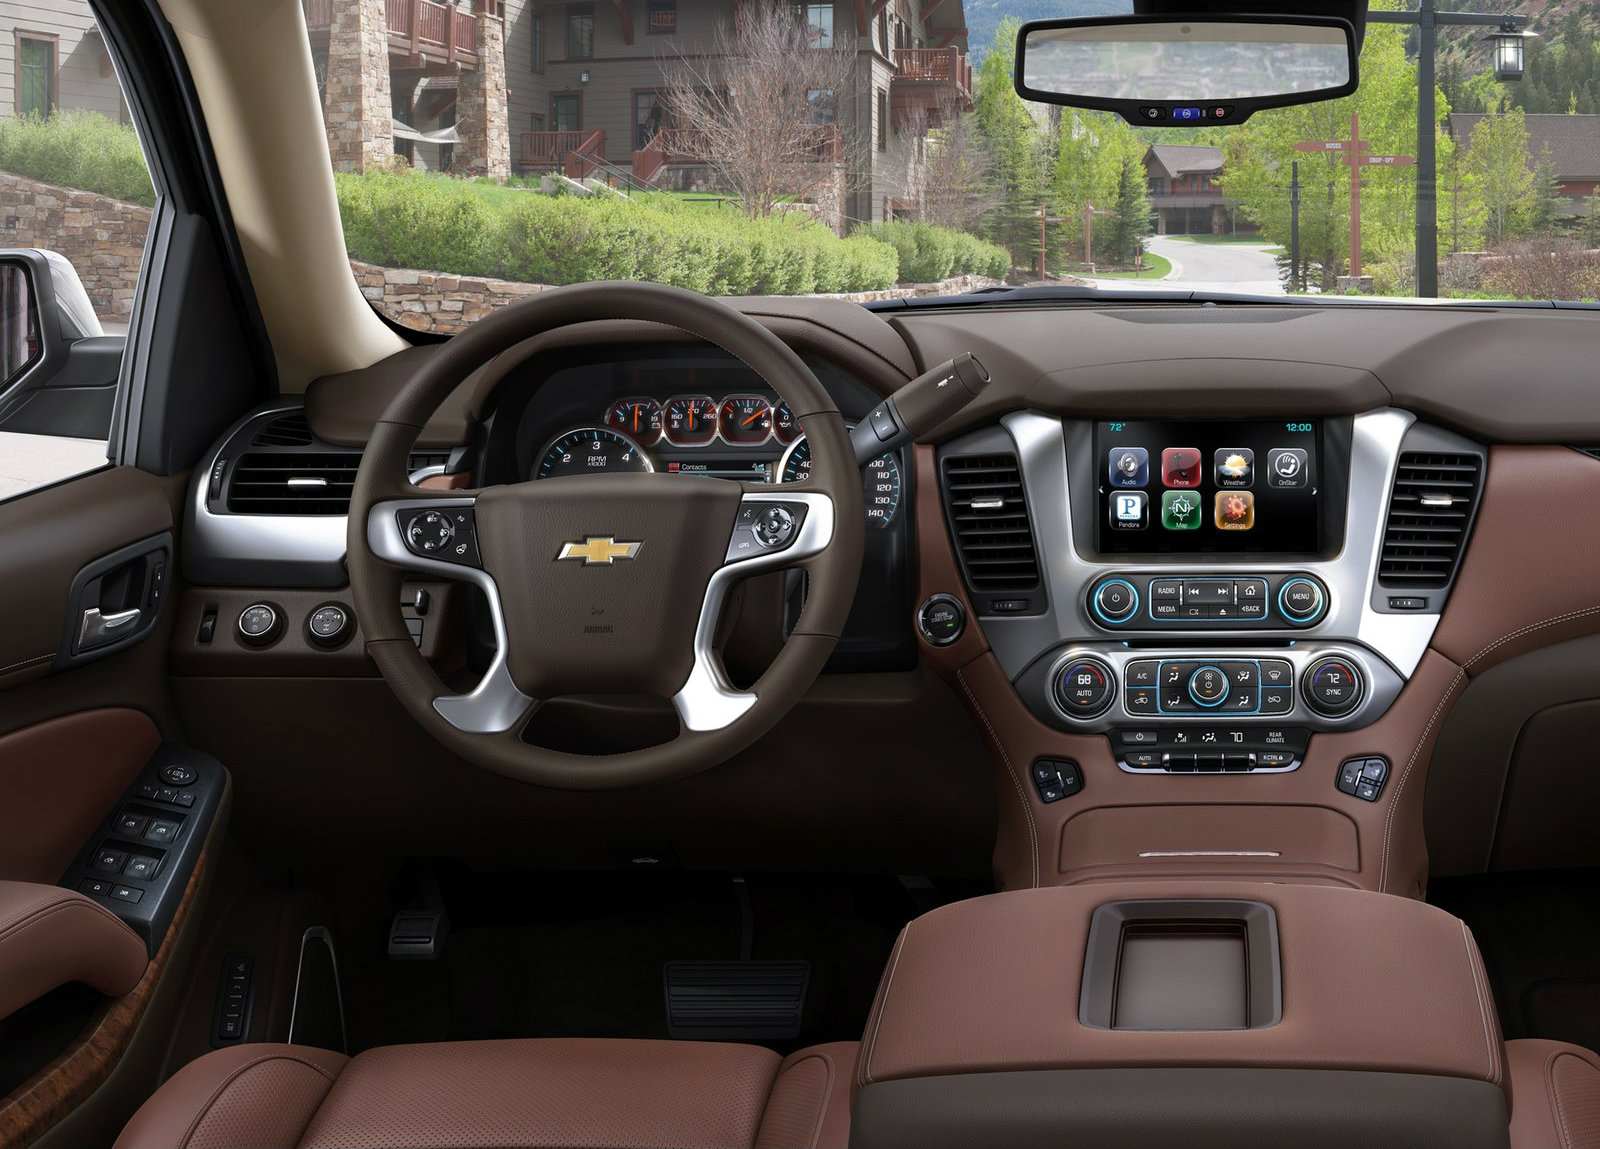 gm-full-size-suvs-updated-for-the-2015i-model-year-photo-gallery_3